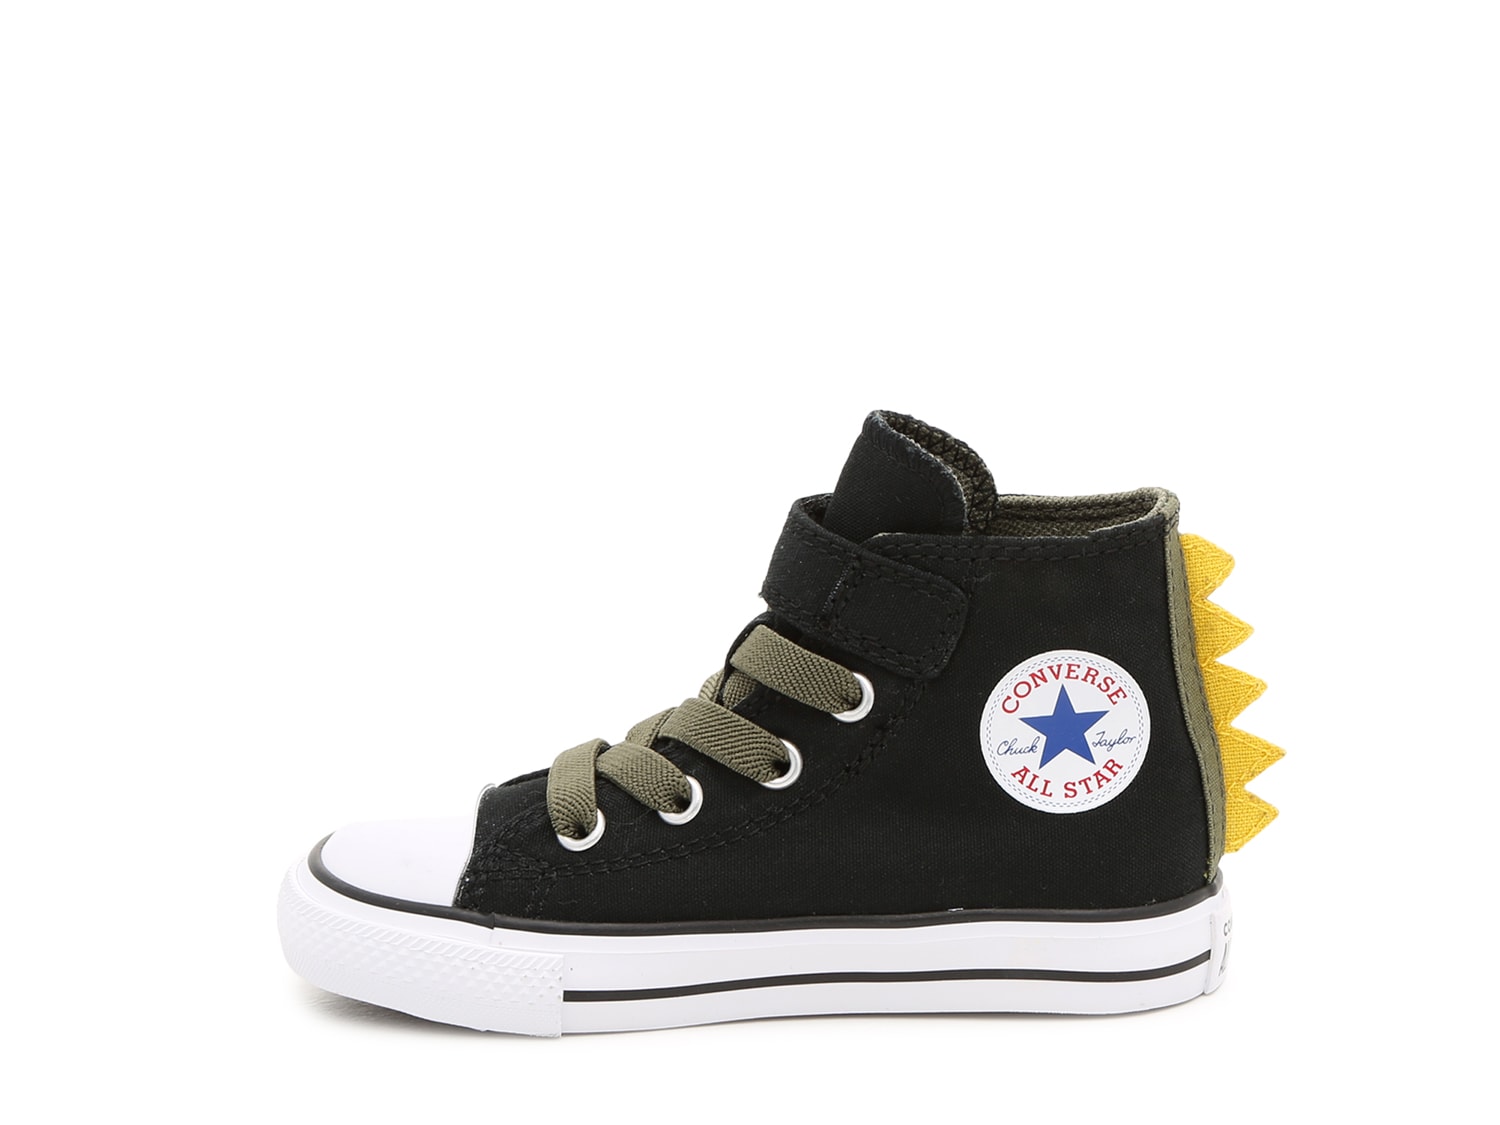 chuck taylor all star dino spikes hook and loop high top